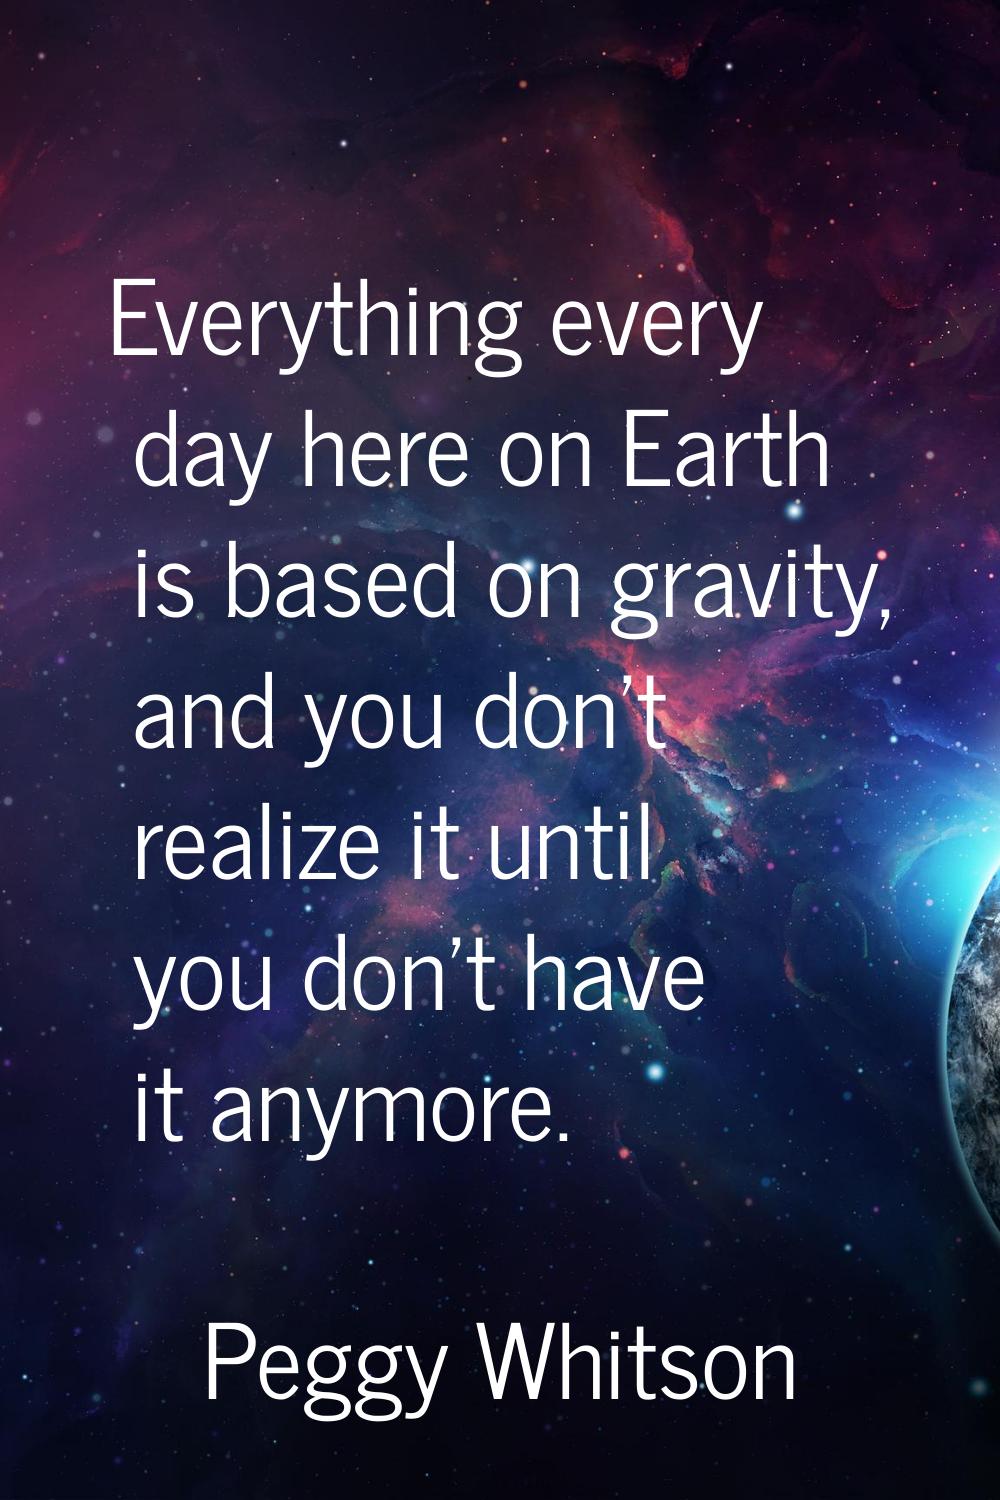 Everything every day here on Earth is based on gravity, and you don't realize it until you don't ha